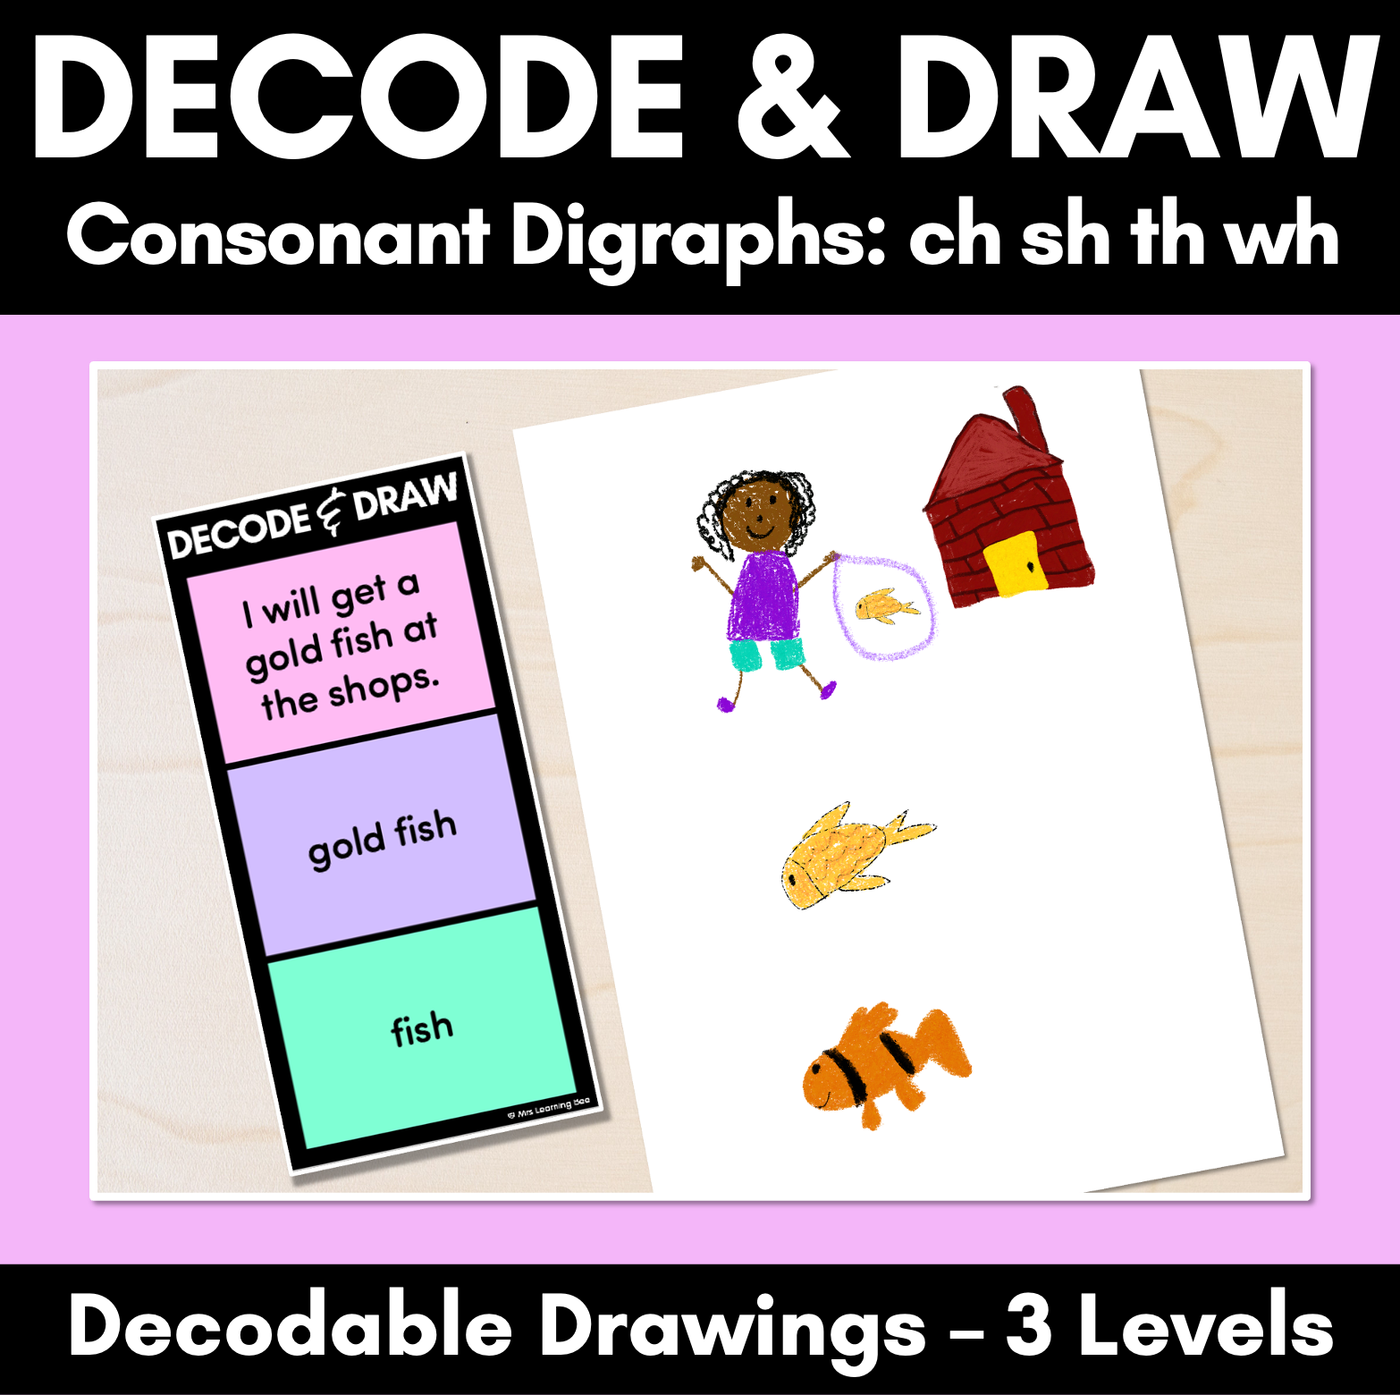 DECODE & DRAW - Consonant Digraphs CH SH TH WH - Decodable Drawing Phonics Task Cards